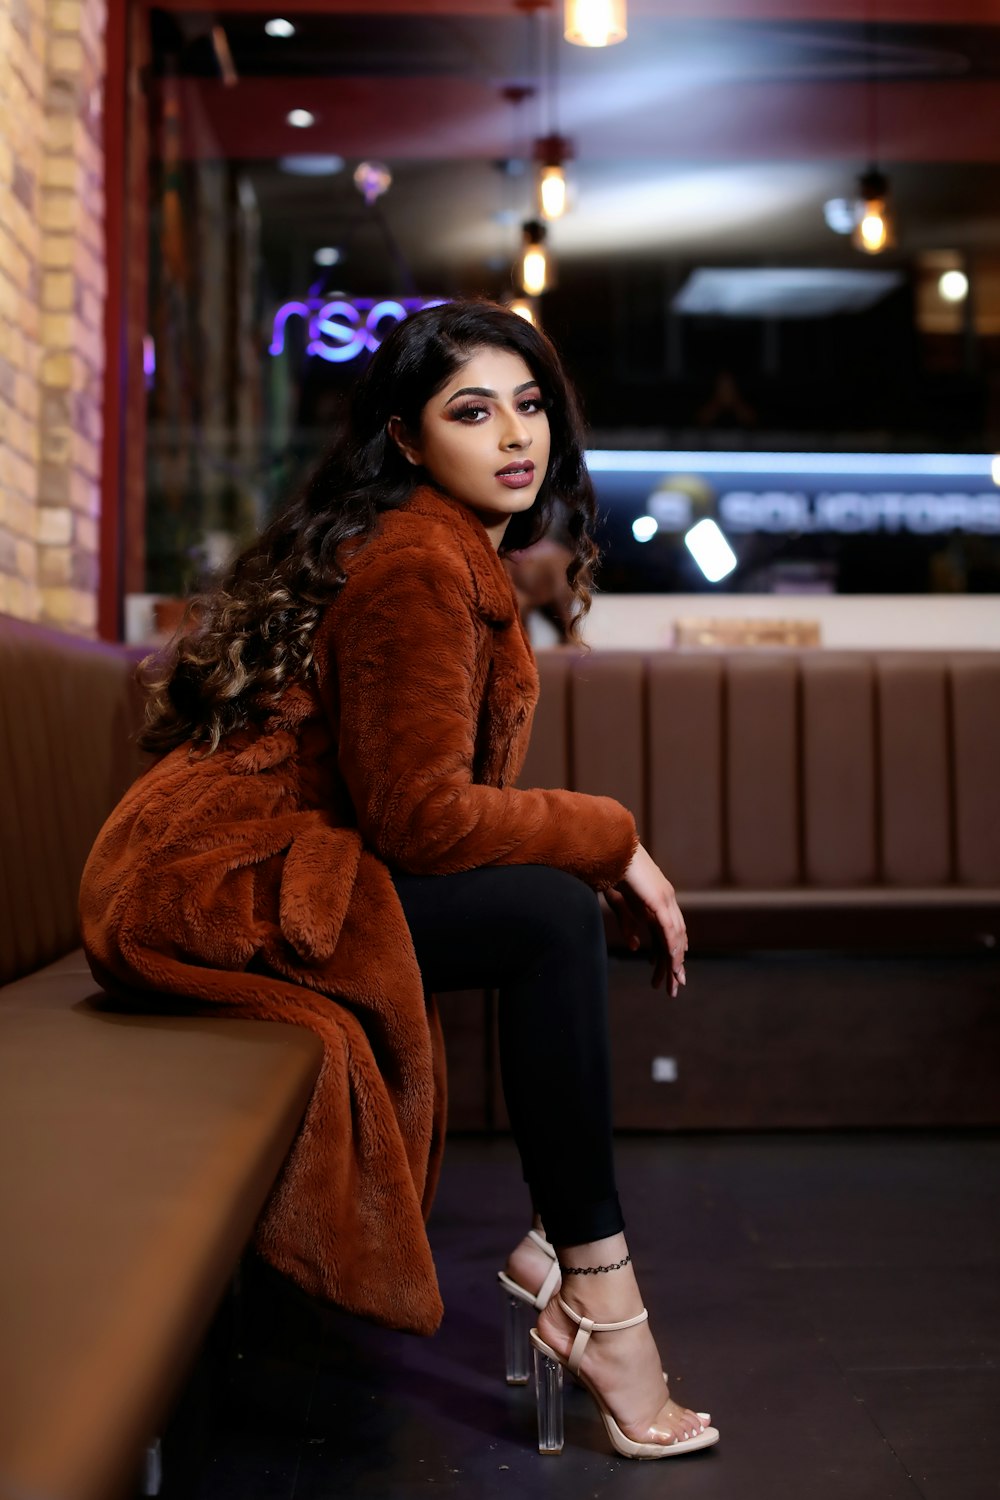 woman in brown fur coat sitting on brown wooden bench